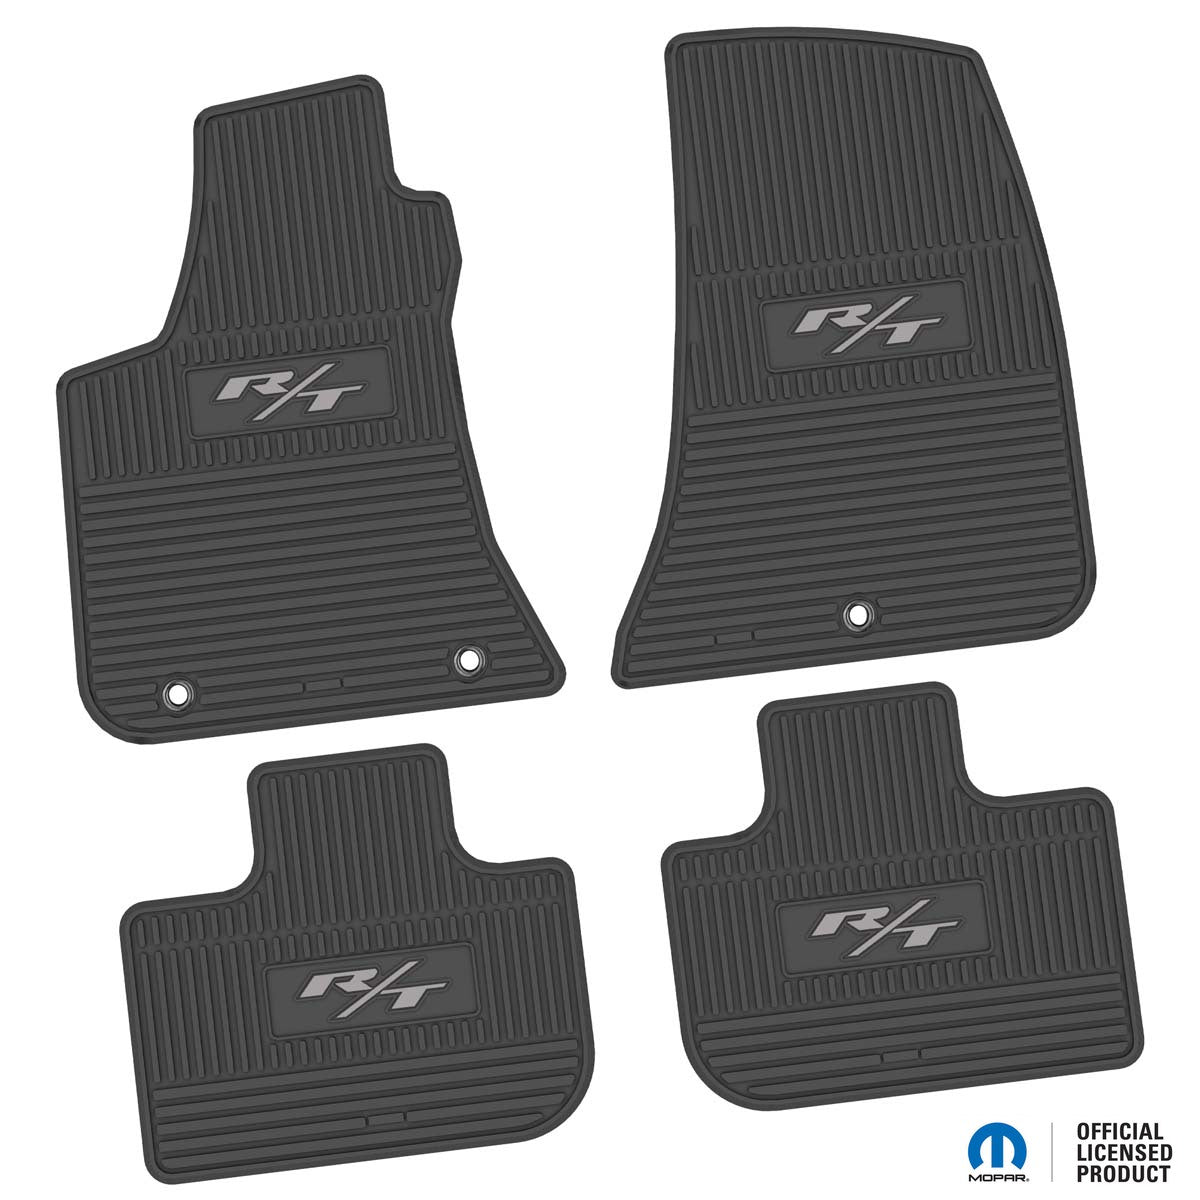 Charger Floor Mats 11-23 Dodge Charger RWD 4 Piece Custom Vintage Scene w/ R/T (2015-Current) Insert - Black w/ Silver Insert FlexTread